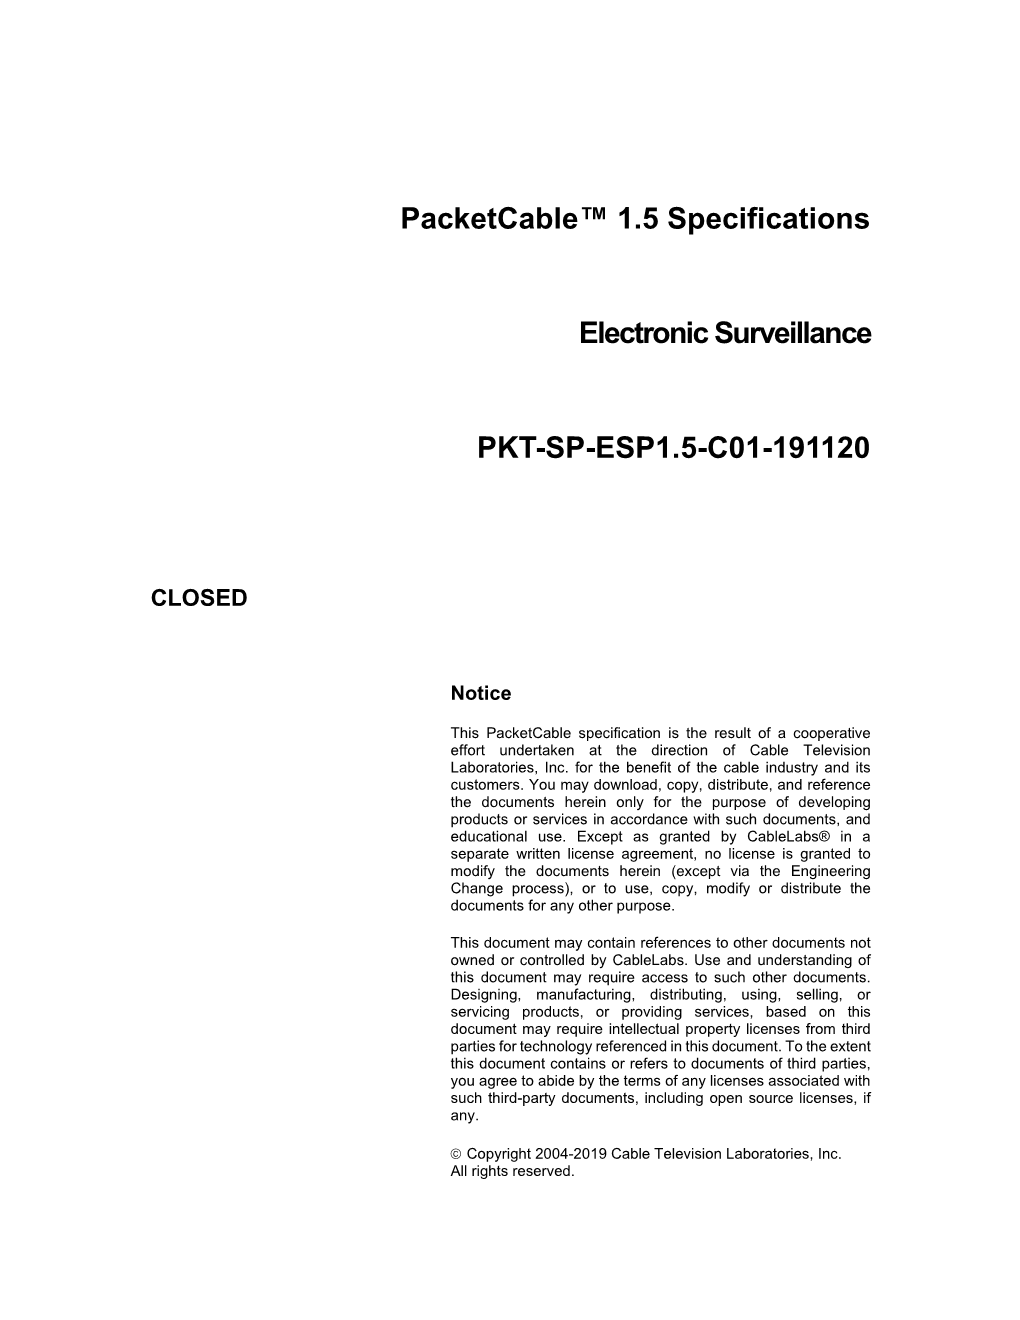 Packetcable Electronic Surveillance Specification Relies on Multiple Components (CMS, CMTS, MGC, MG, DF) to Gather and Deliver Call Data and Call Content to the LEA